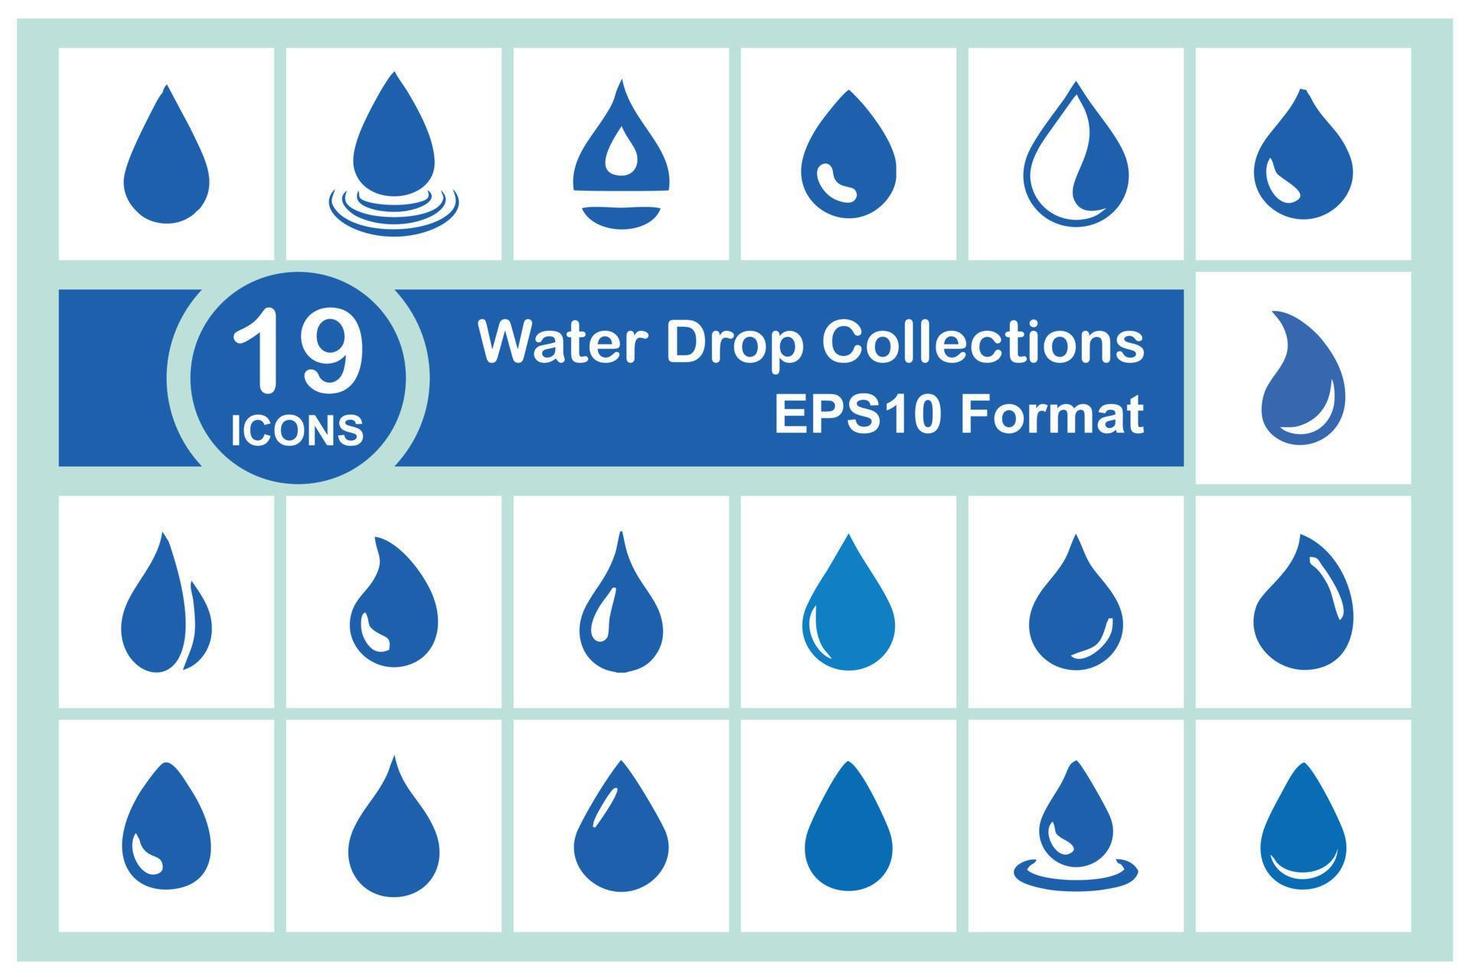 Water drop icons set isolated on white background for your web and mobile app design. Vector illustration of 19 water drop icons. Suitable for design elements involving liquids or water